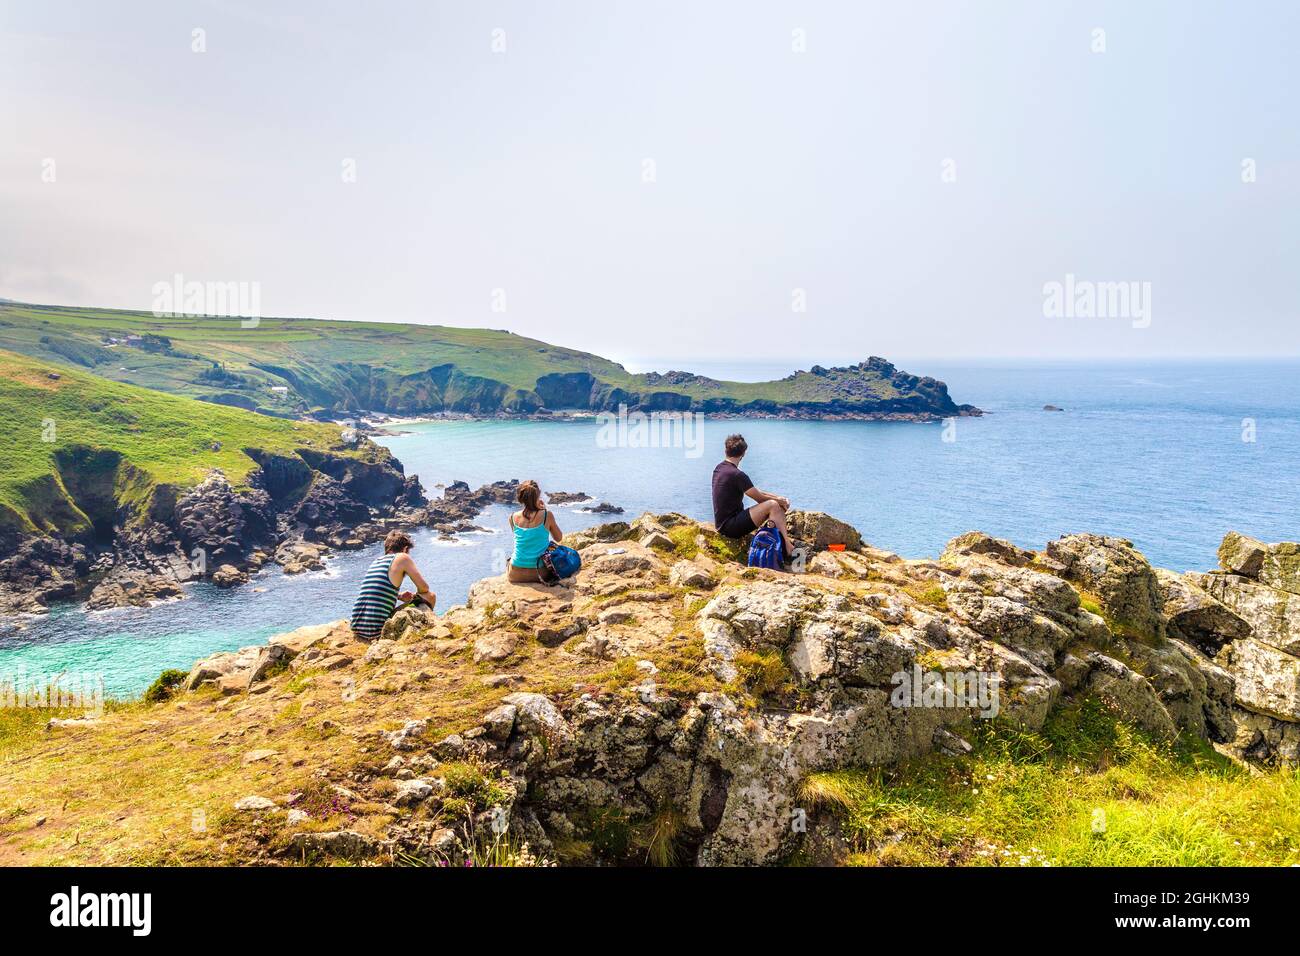 Hikers taking a break at scenic viewpoint of Carnelloe Headland along the South West Coast Path near Zennor, Penwith Peninsula, Cornwall, UK Stock Photo